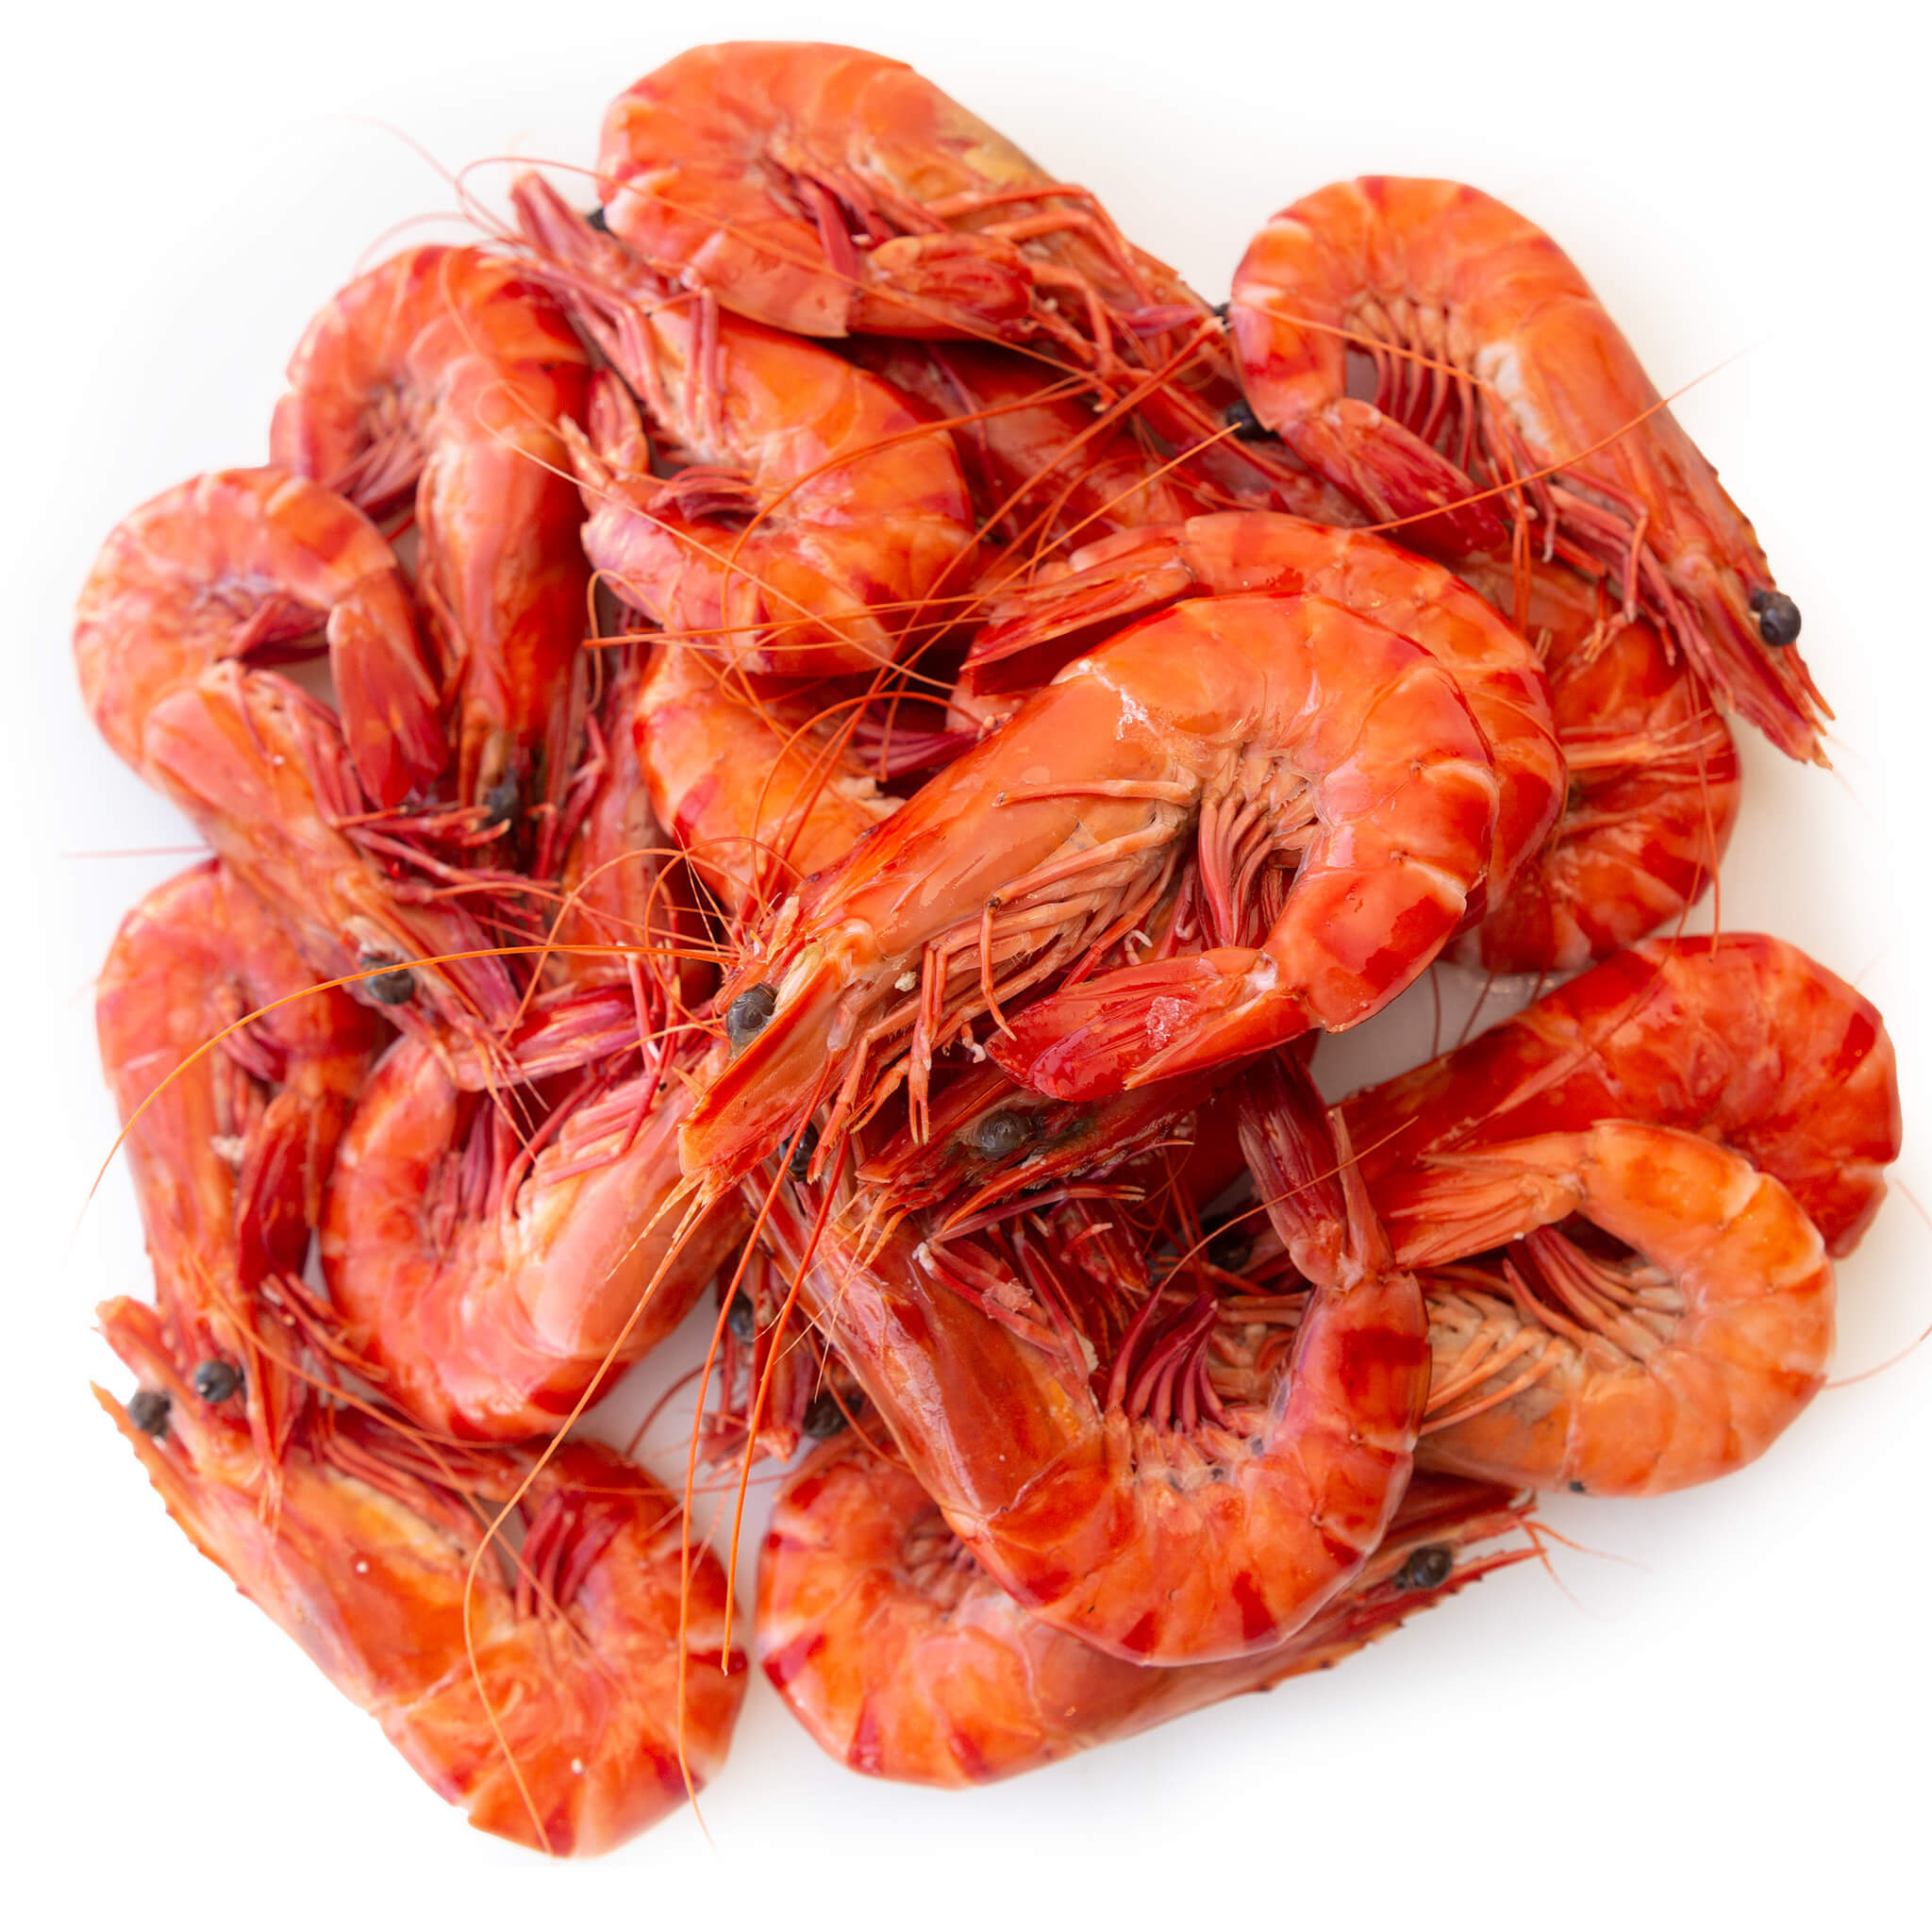 Cooked Tiger Prawns from Steve Costi seafood in Sydney